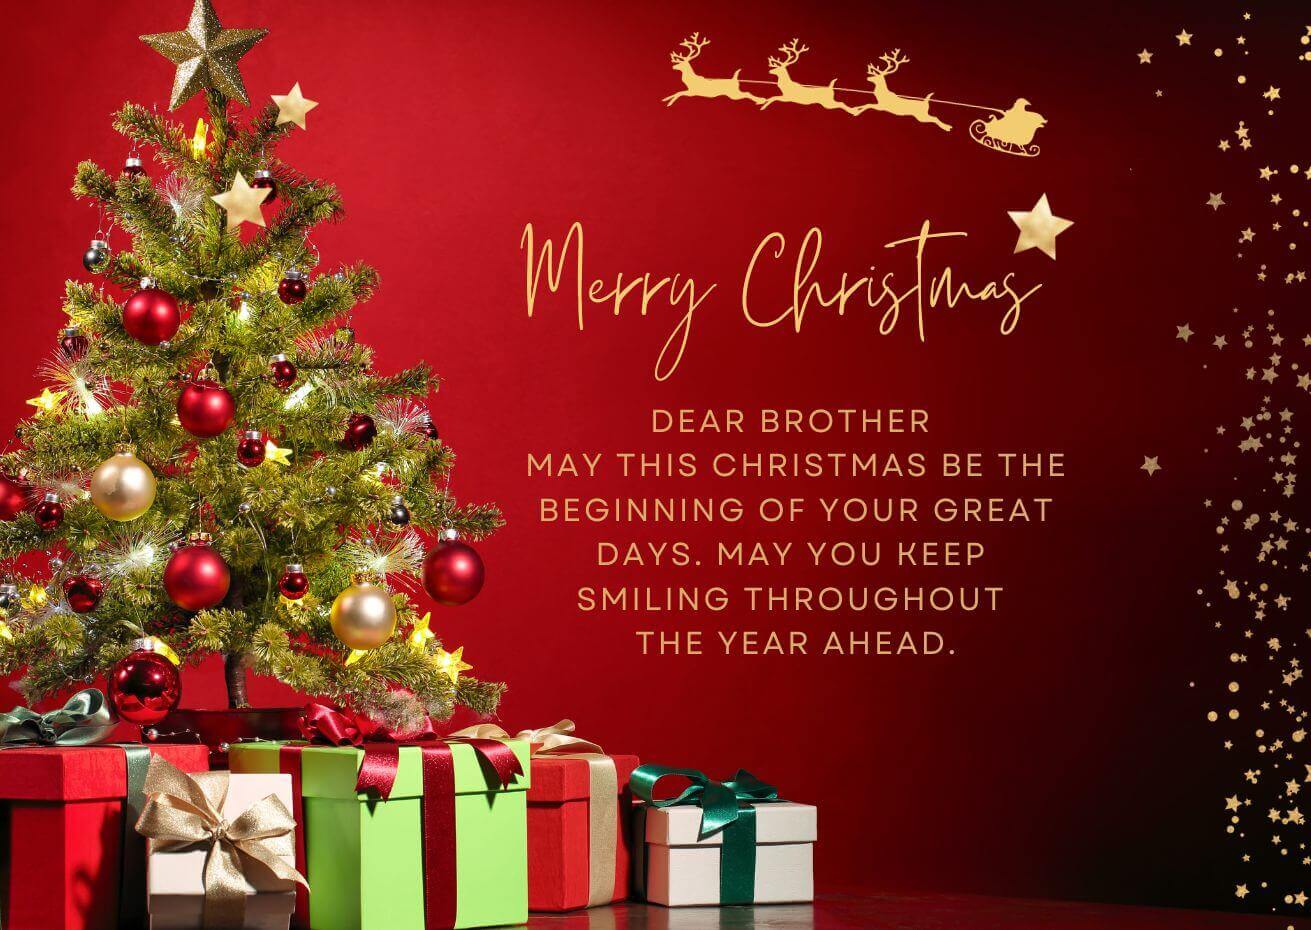 Merry Christmas Wishes For Dear Brother